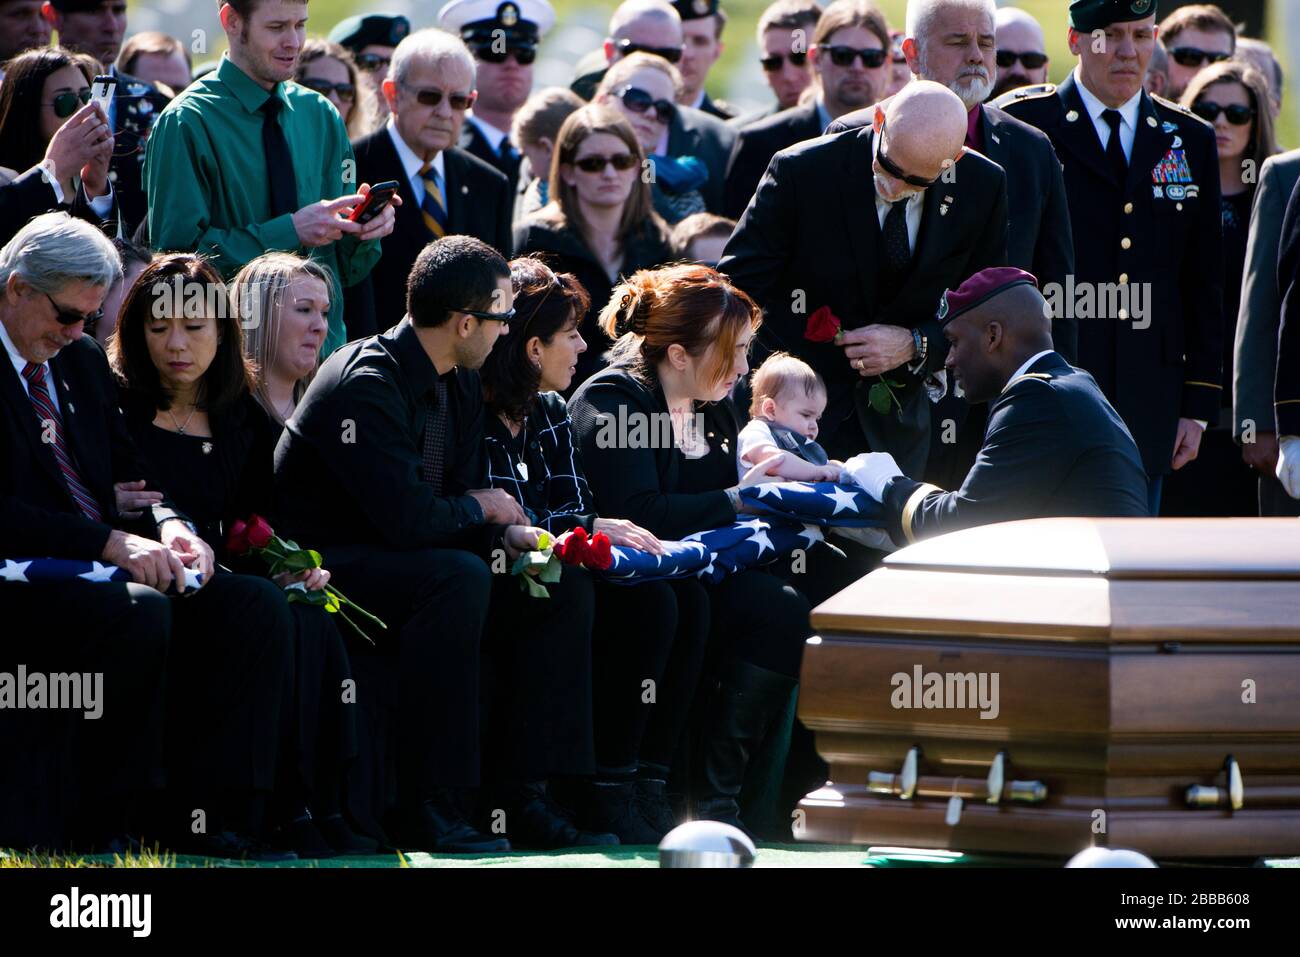 'U.S. Army Brig. Gen. Xavier Brunson, commander of U.S. Army Special Forces Command, presents an American Flag to Declan, son of U.S. Army Sgt. First Class Matthew Q. McClintock, during the graveside service for McClintock in Section 60 of Arlington National Cemetery, March 7, 2016, in Arlington, Va. McClintock was killed in action Jan. 5, 2016, in Afghanistan. (U.S. Army photo by Rachel Larue/Arlington National Cemetery/released); 7 March 2016, 14:51; Graveside service for U.S. Army Sgt First Class Matthew Q. McClintock takes place in Section 60 of Arlington National Cemetery; Arlington Natio Stock Photo